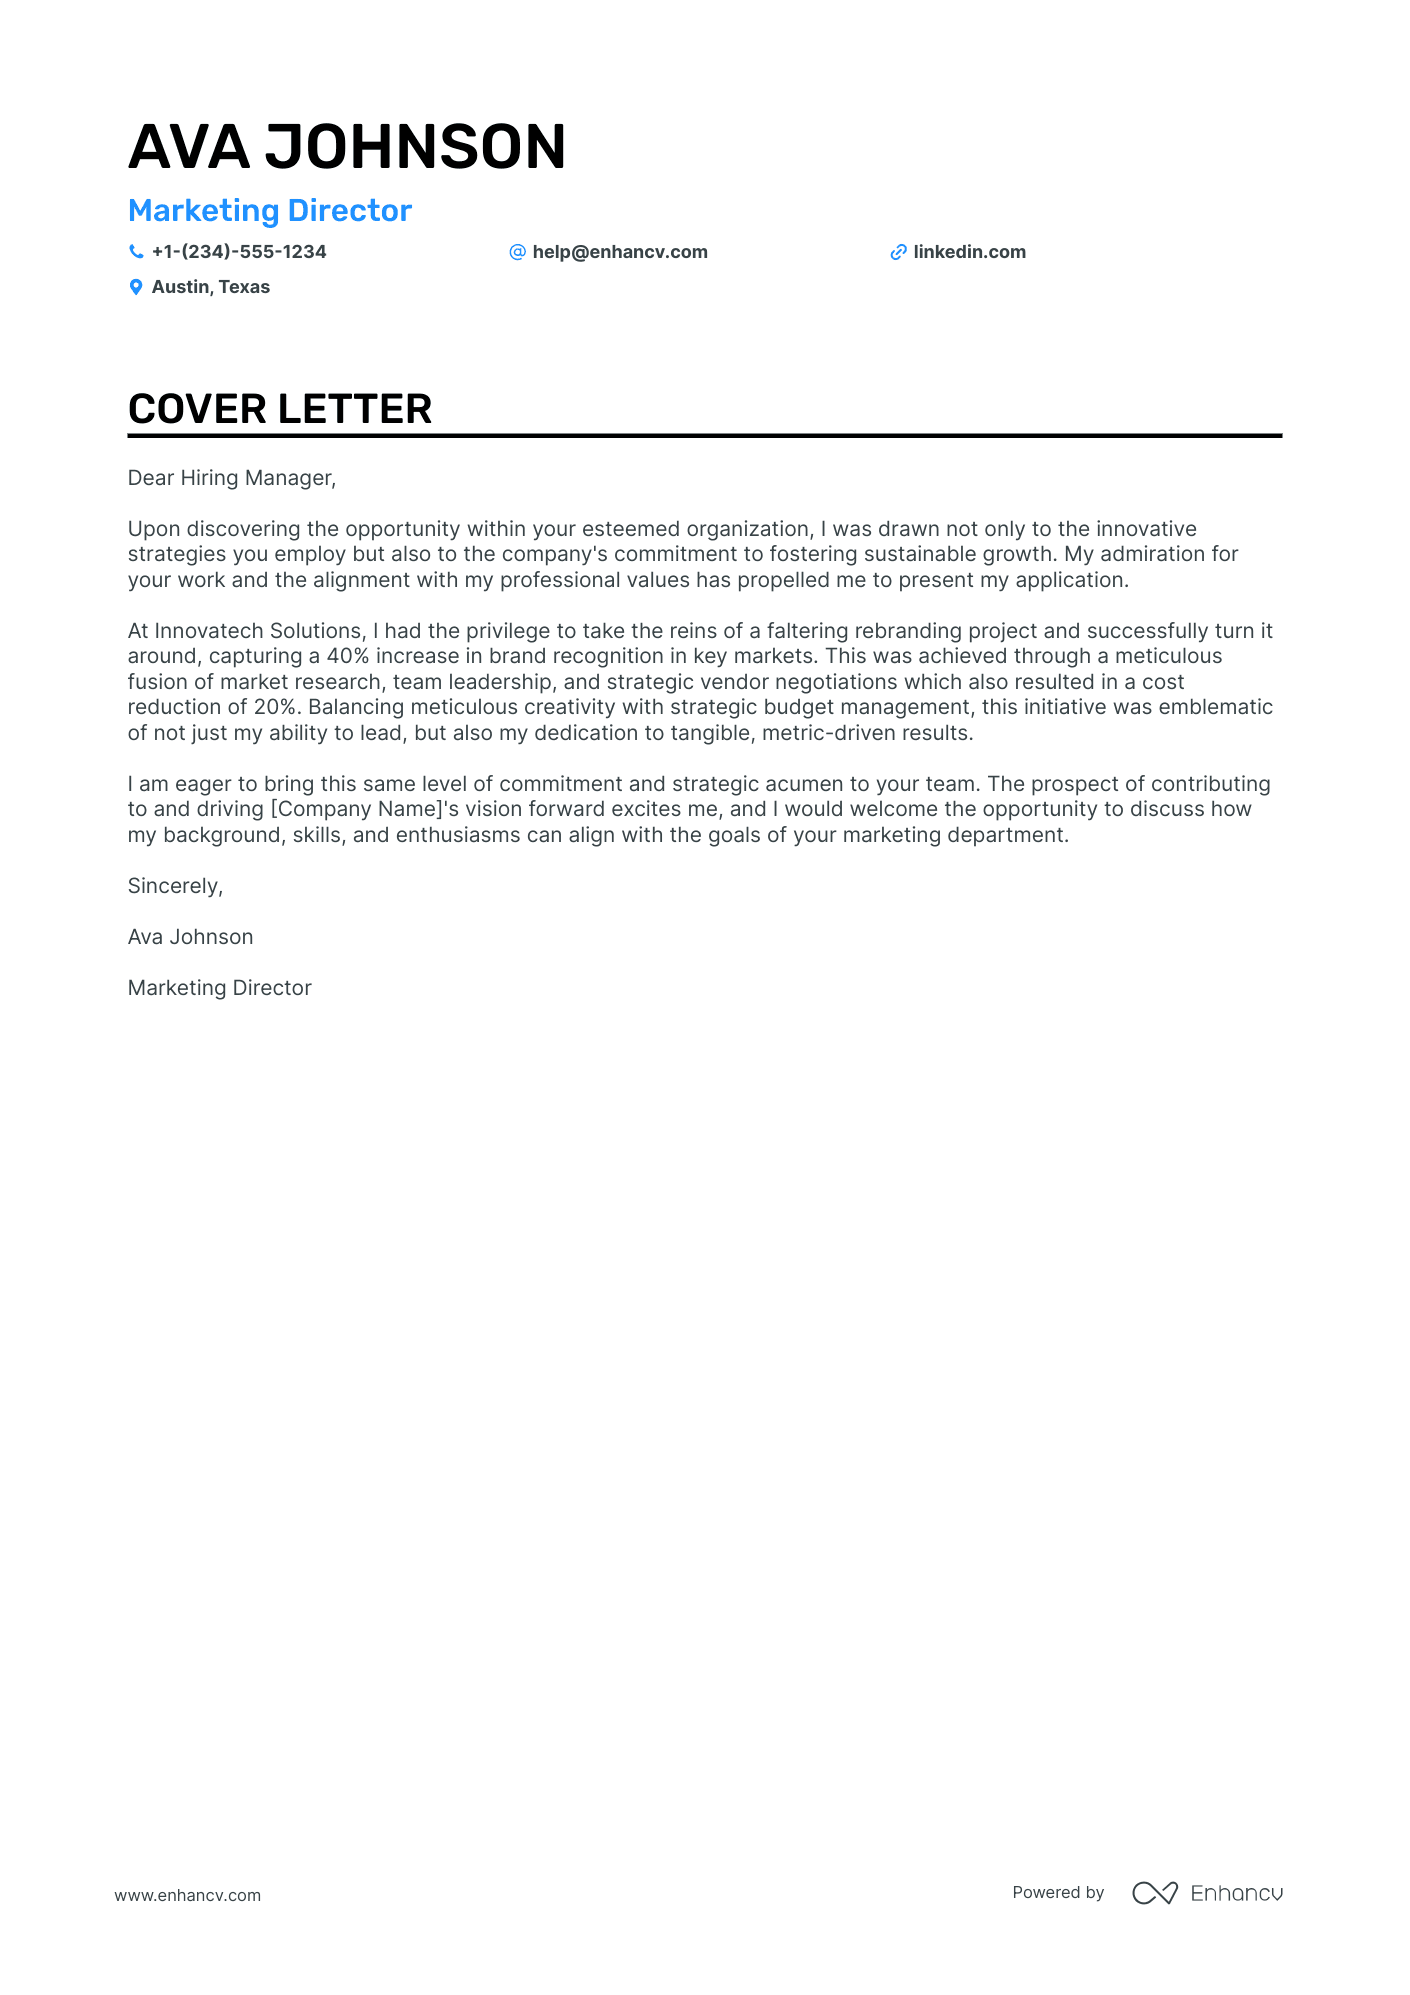 Public Relations Director cover letter